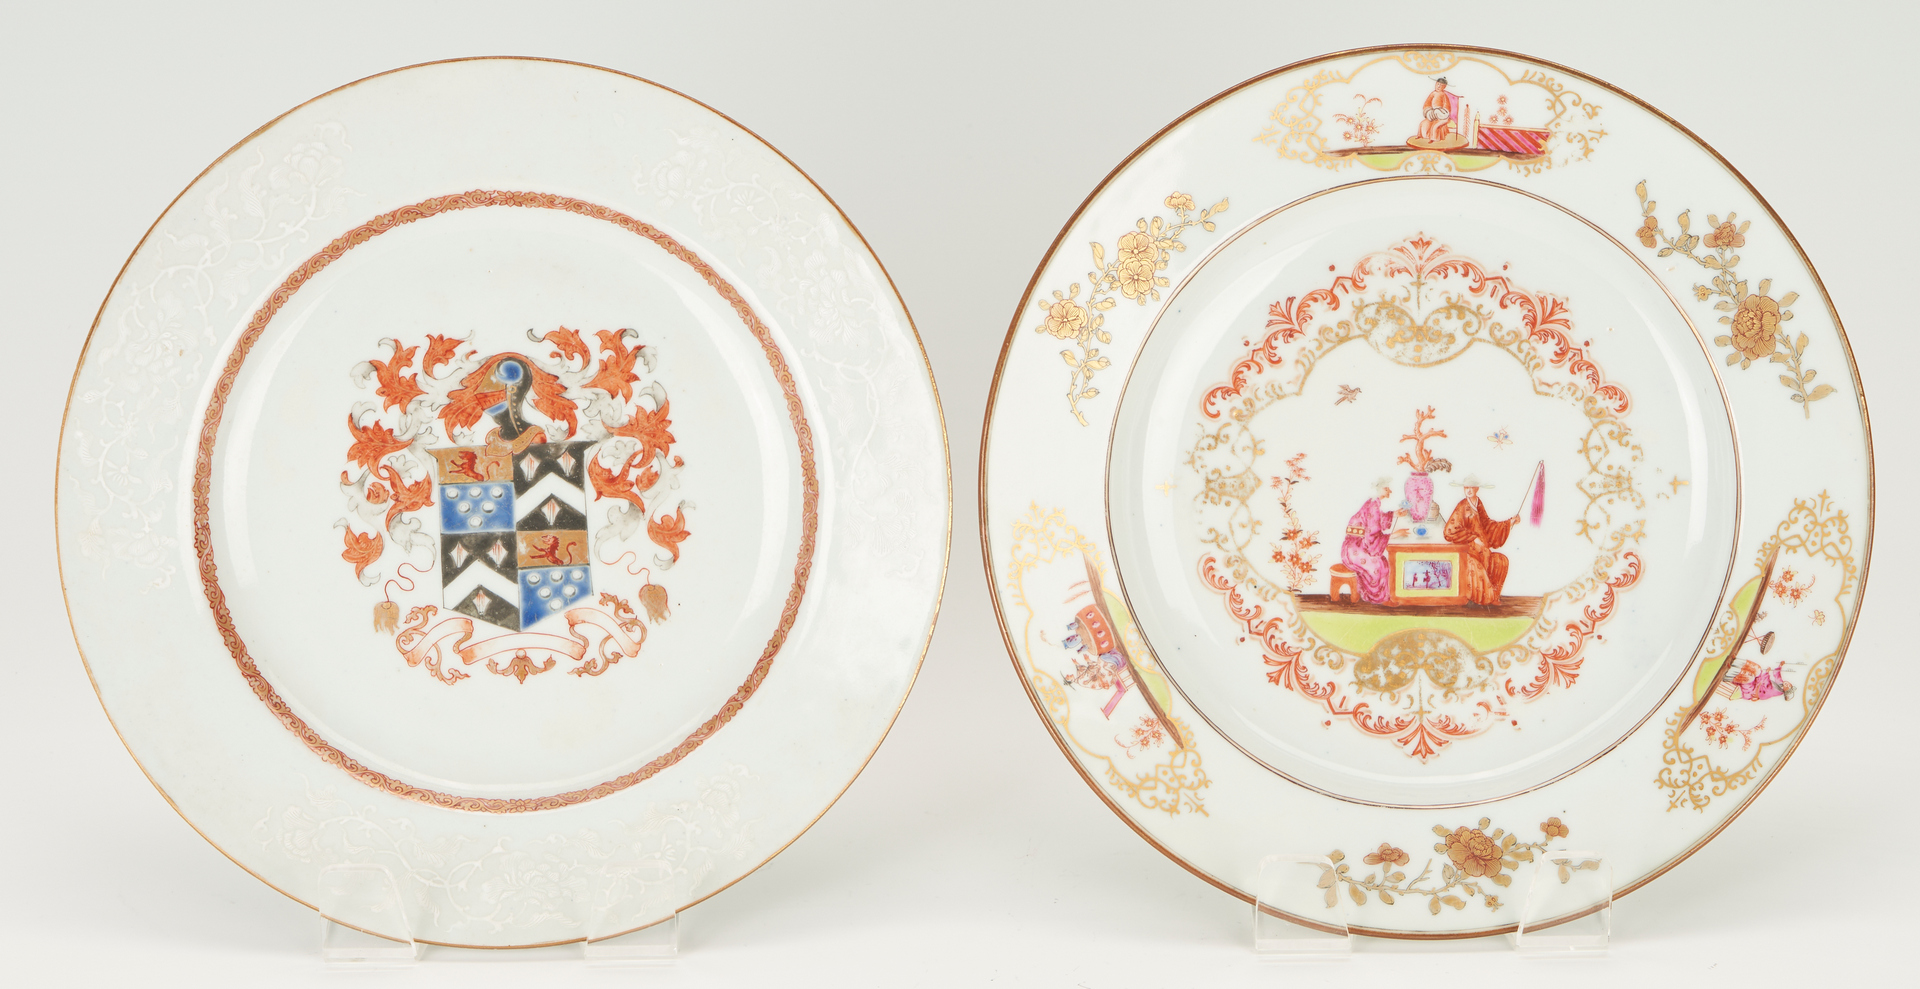 Lot 24: 4 Chinese Export Porcelain Armorial Plates & 1 Shallow Bowl, Total 5